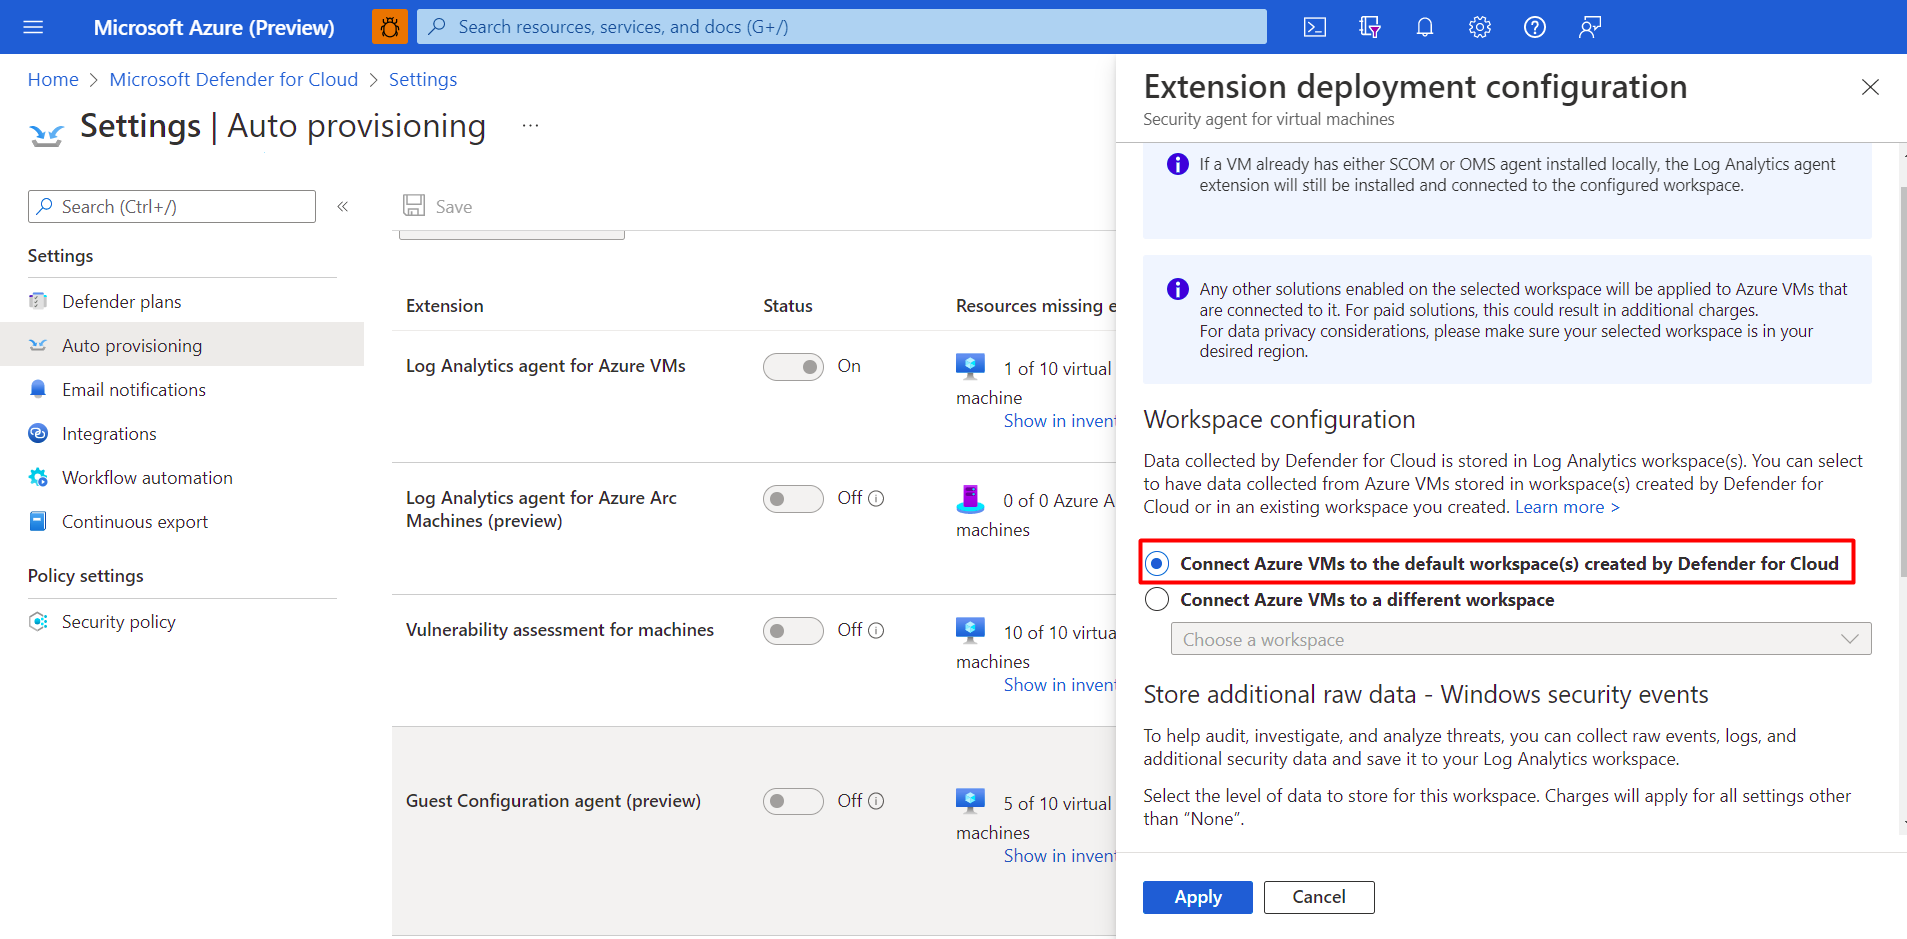 Screenshot showing how to auto-provision Defender for Cloud to manage your workspaces.